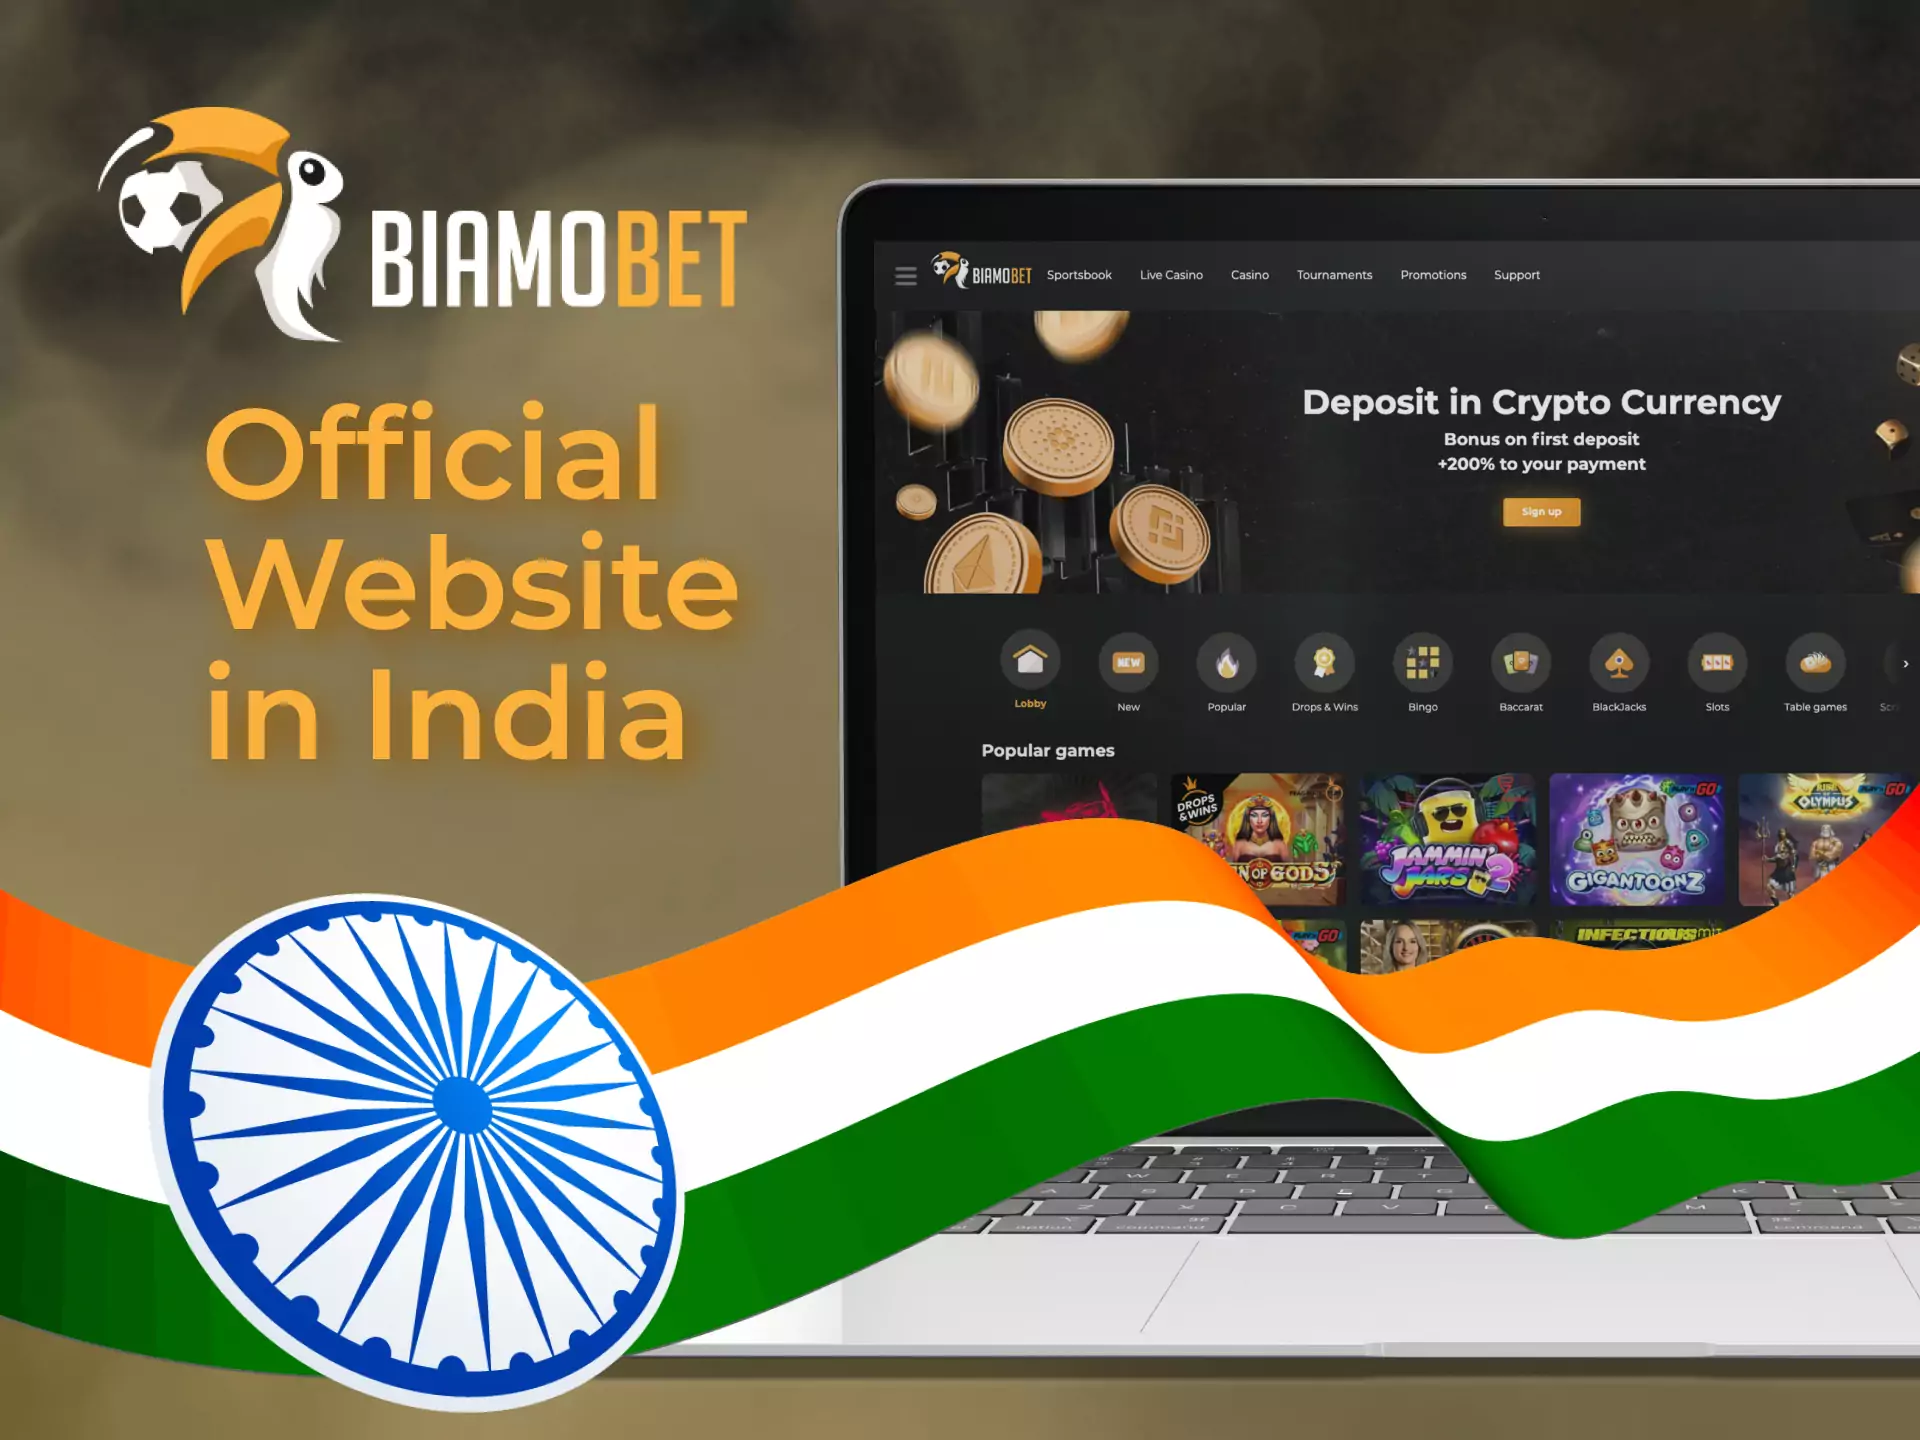 In India, you can use the official website of Biamobet for betting and playing casino games.